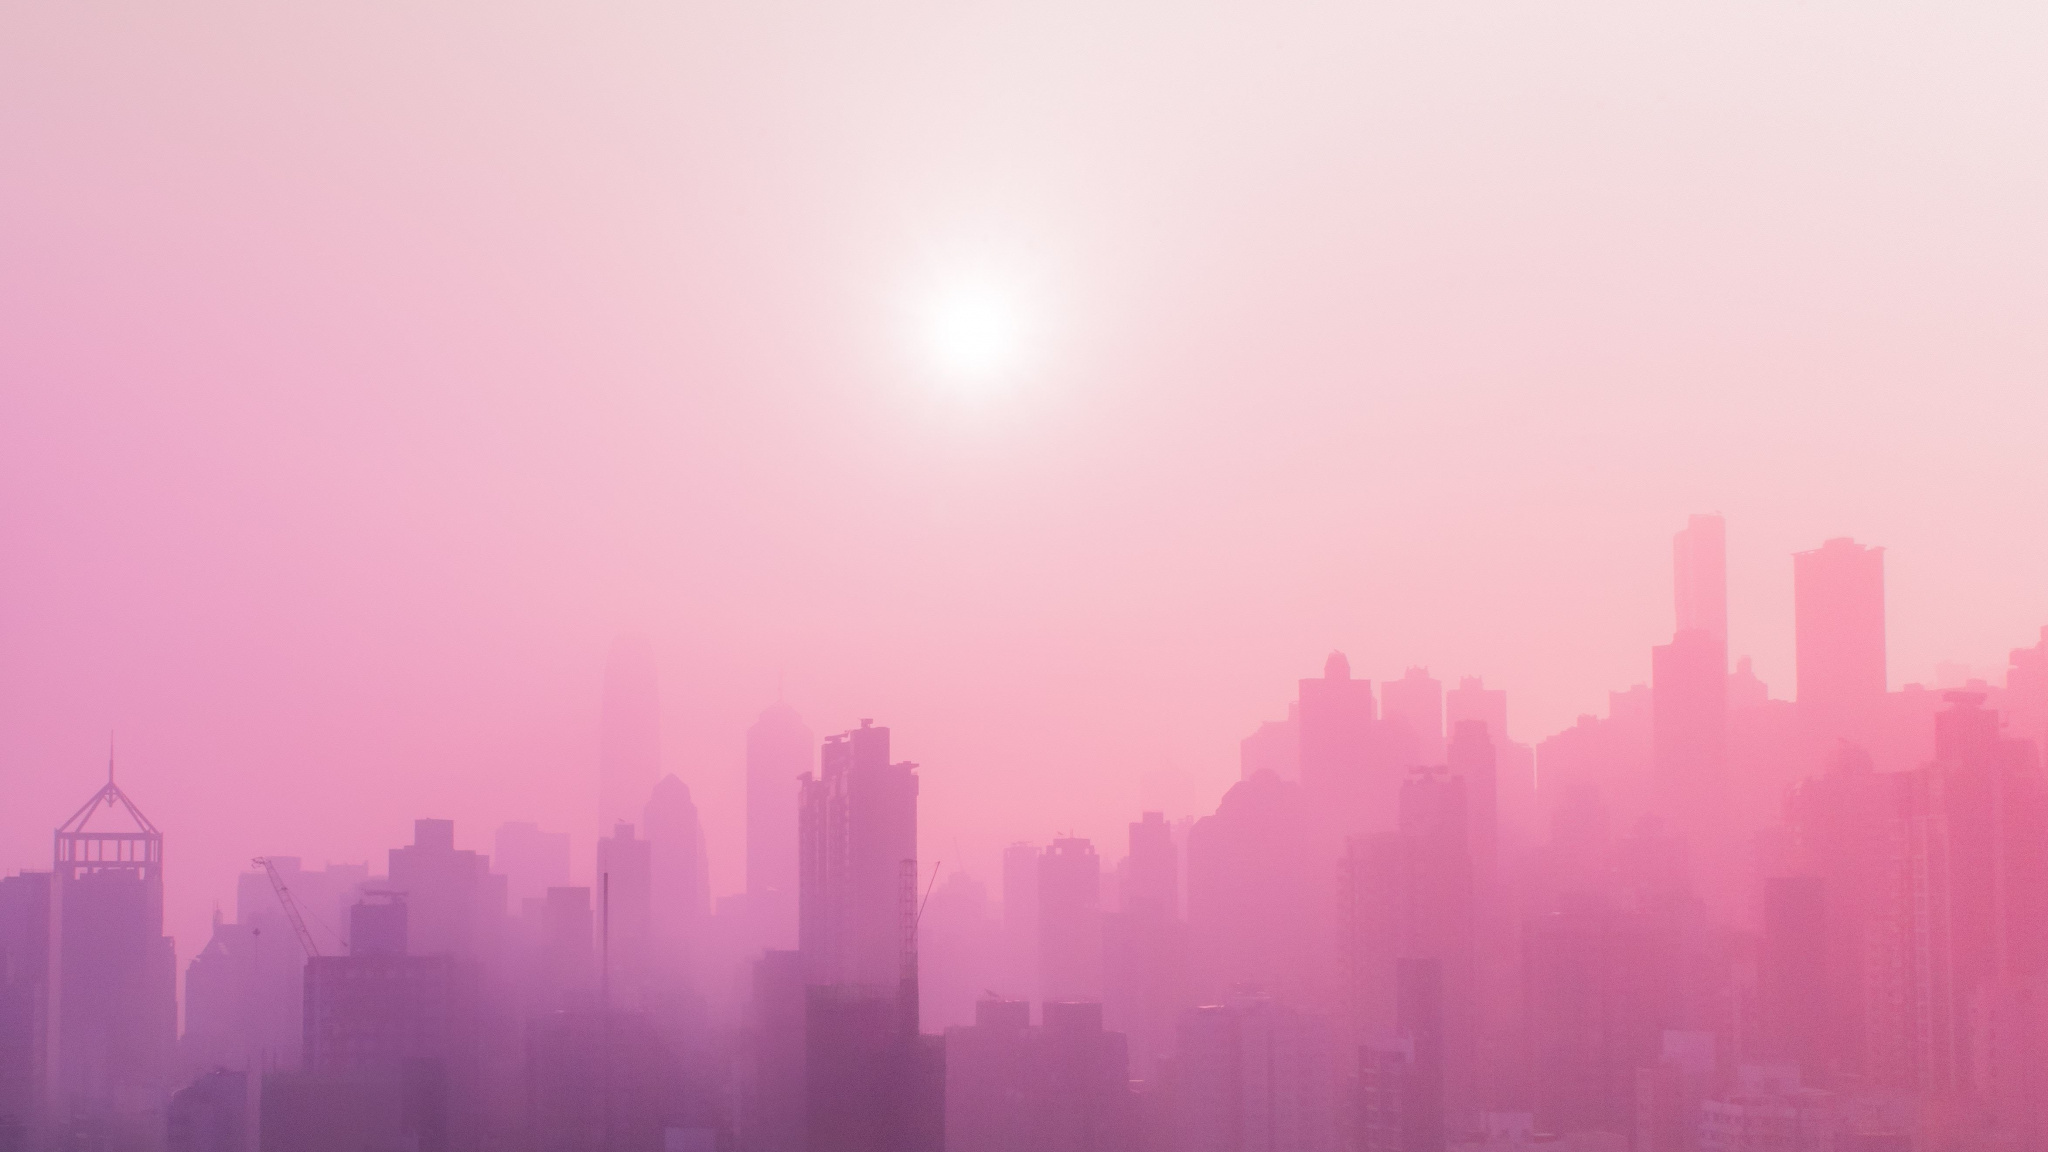 Urban, Skyscrapers, Buildings, Sunny Day, Pink Smog, - Hd Pink Wallpaper Iphone 8 Plus , HD Wallpaper & Backgrounds